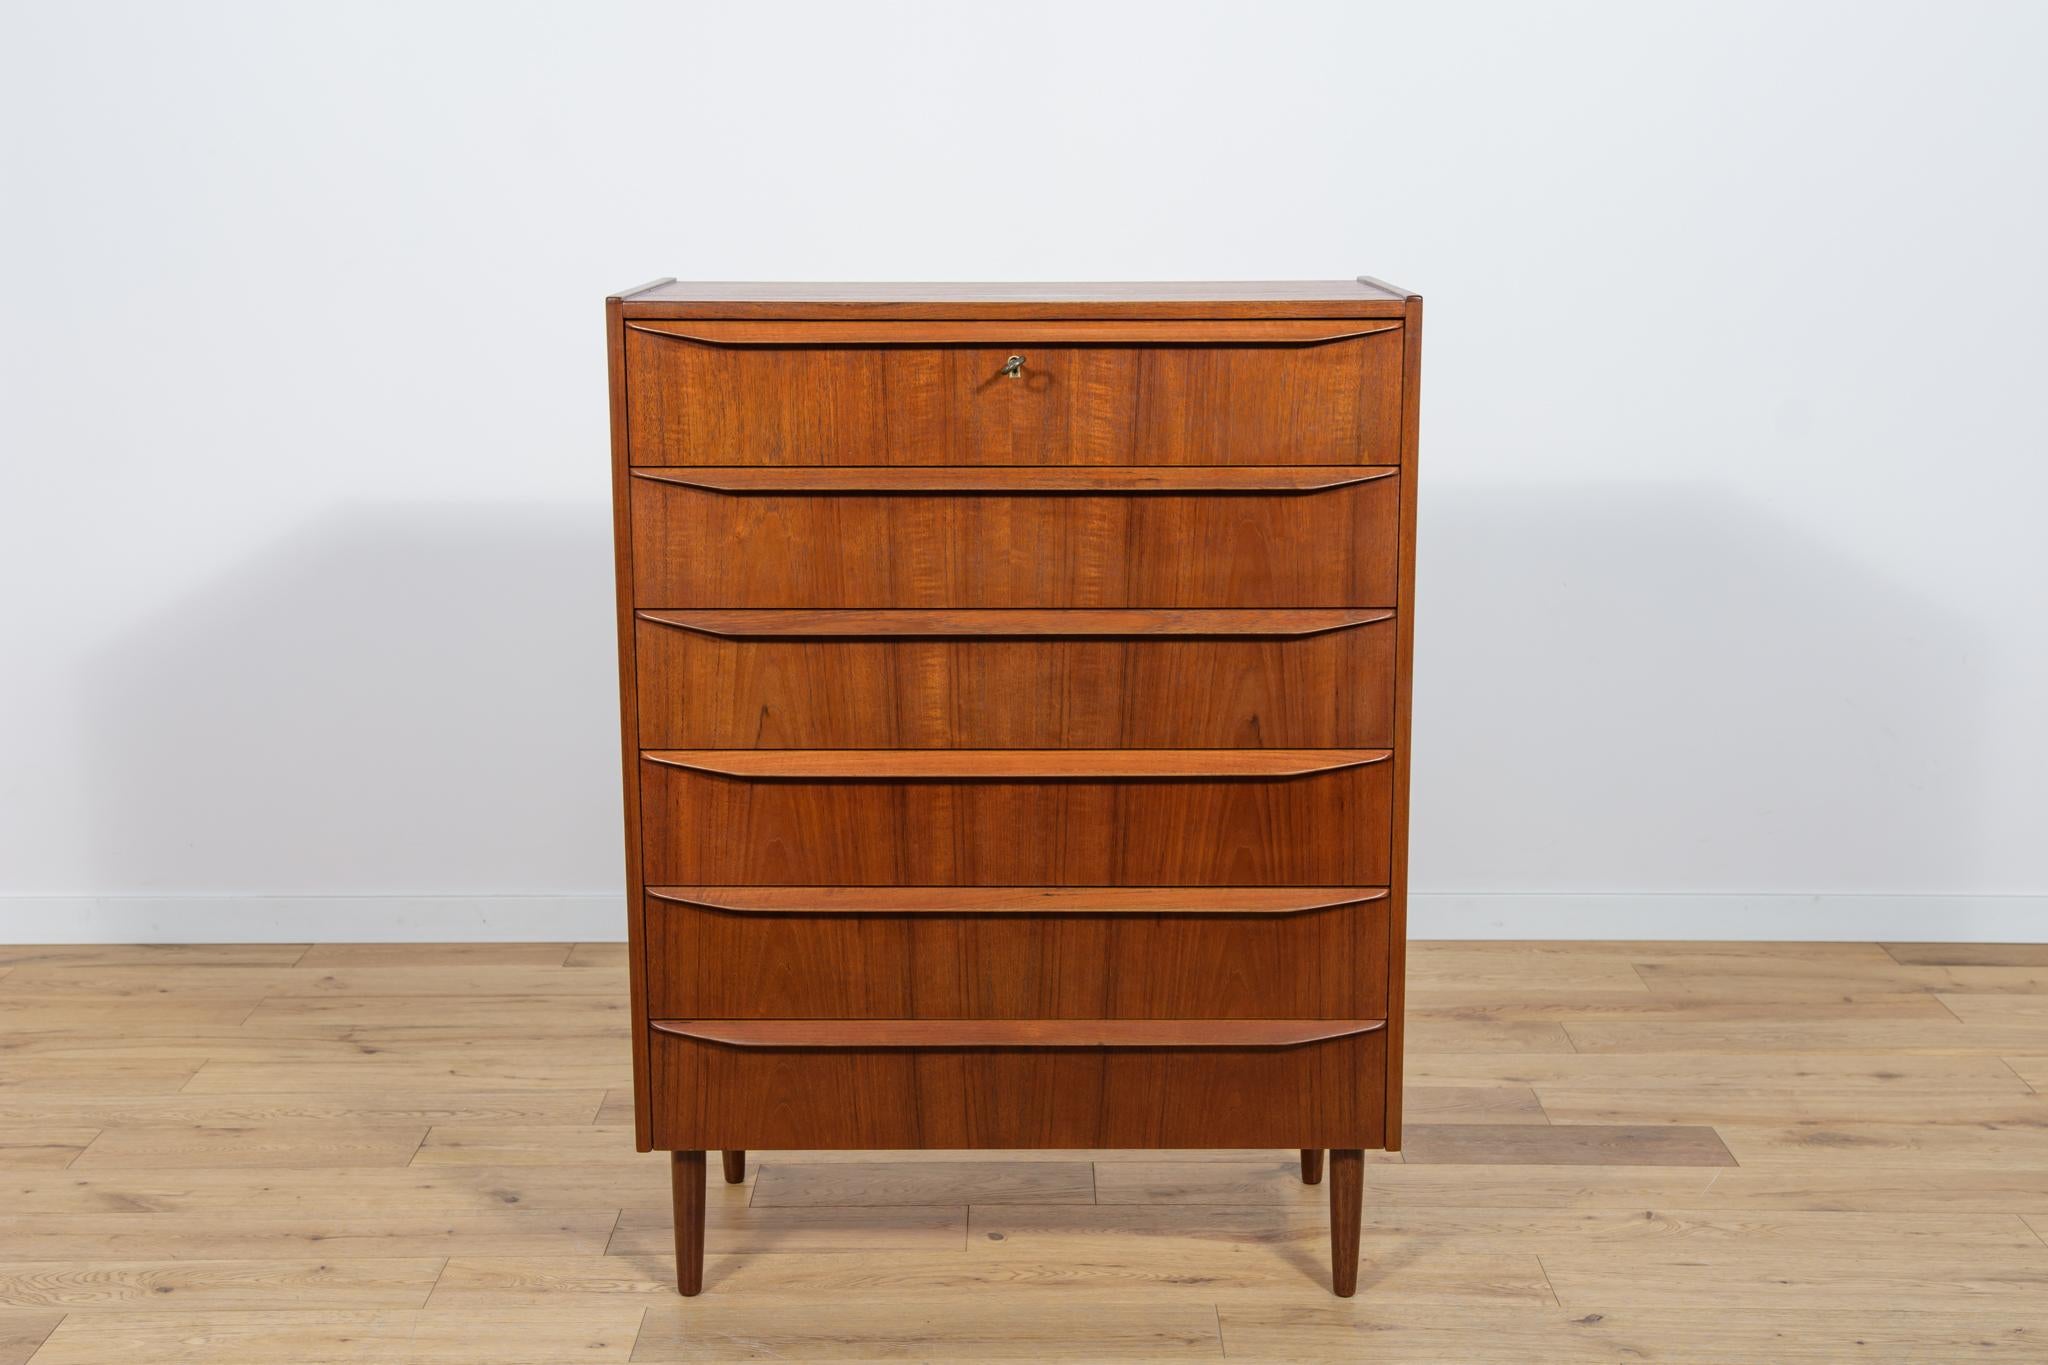 Teak dresser with six drawers made in the 1960s in Denmark. The dresser is a great example of the Danish Mid-Century style and is characterized by high quality of design and workmanship. The dresser has contoured handles. The dresser has undergone a